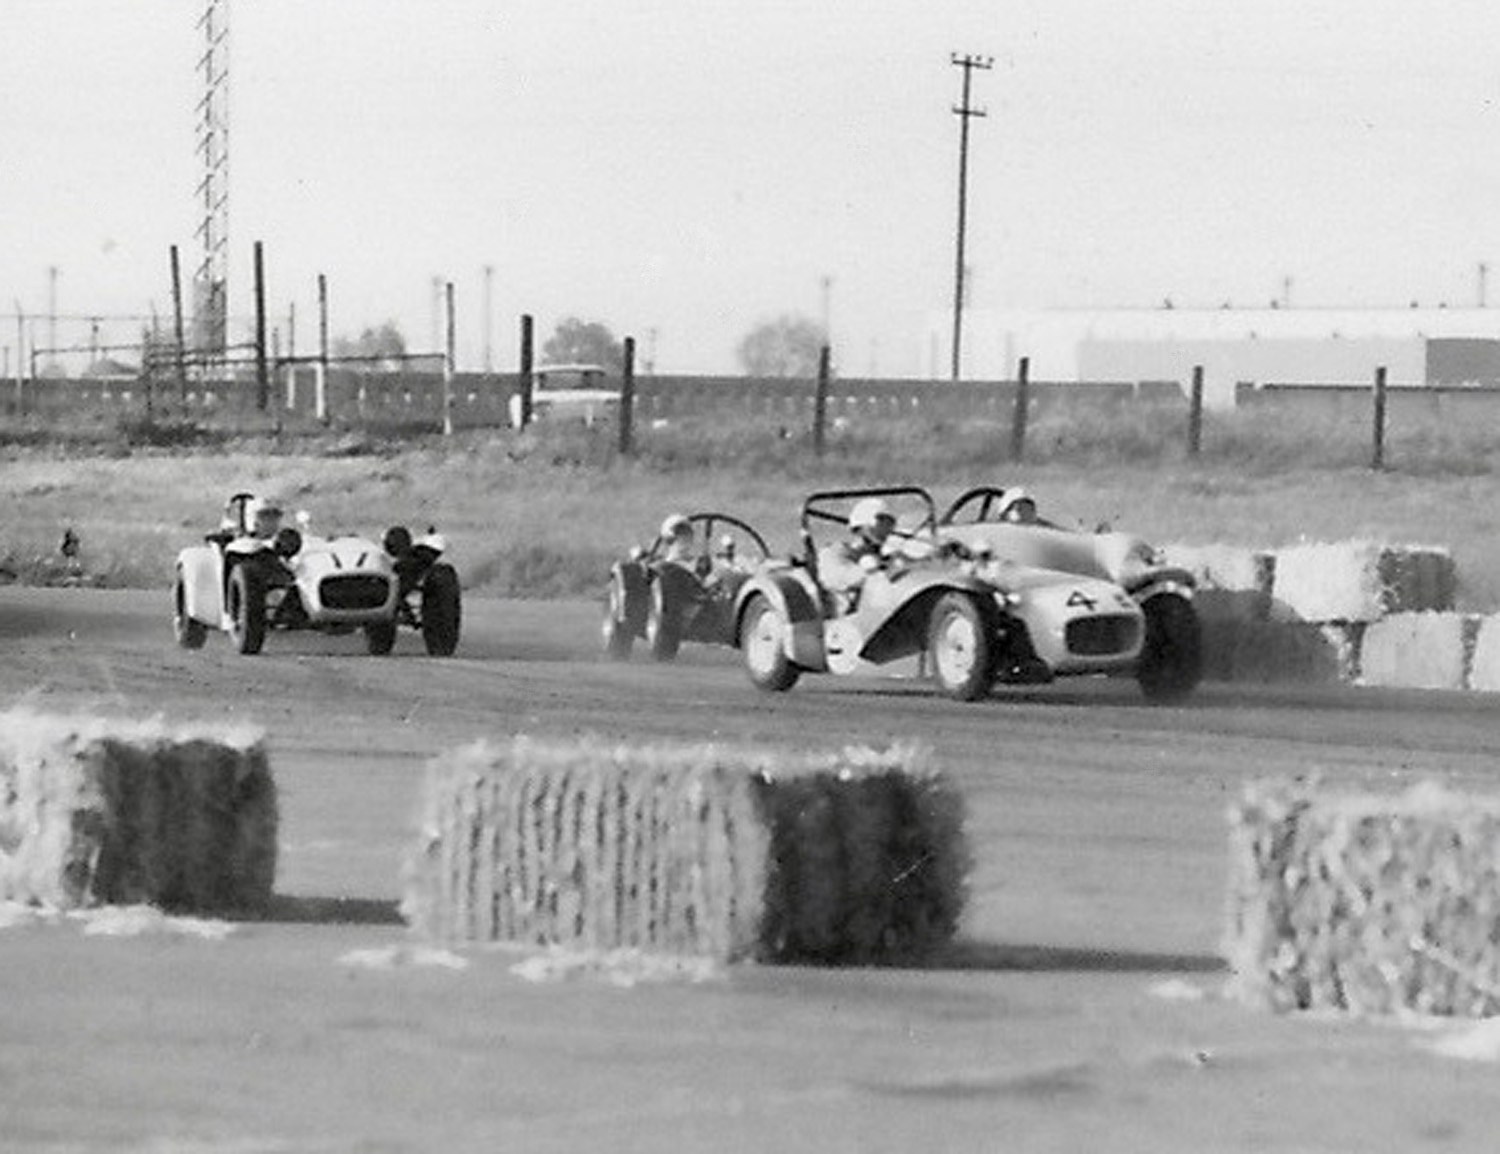 Gary Cook (4) leads Jerry Pacheco (17) - Contra Costa GP April 1965